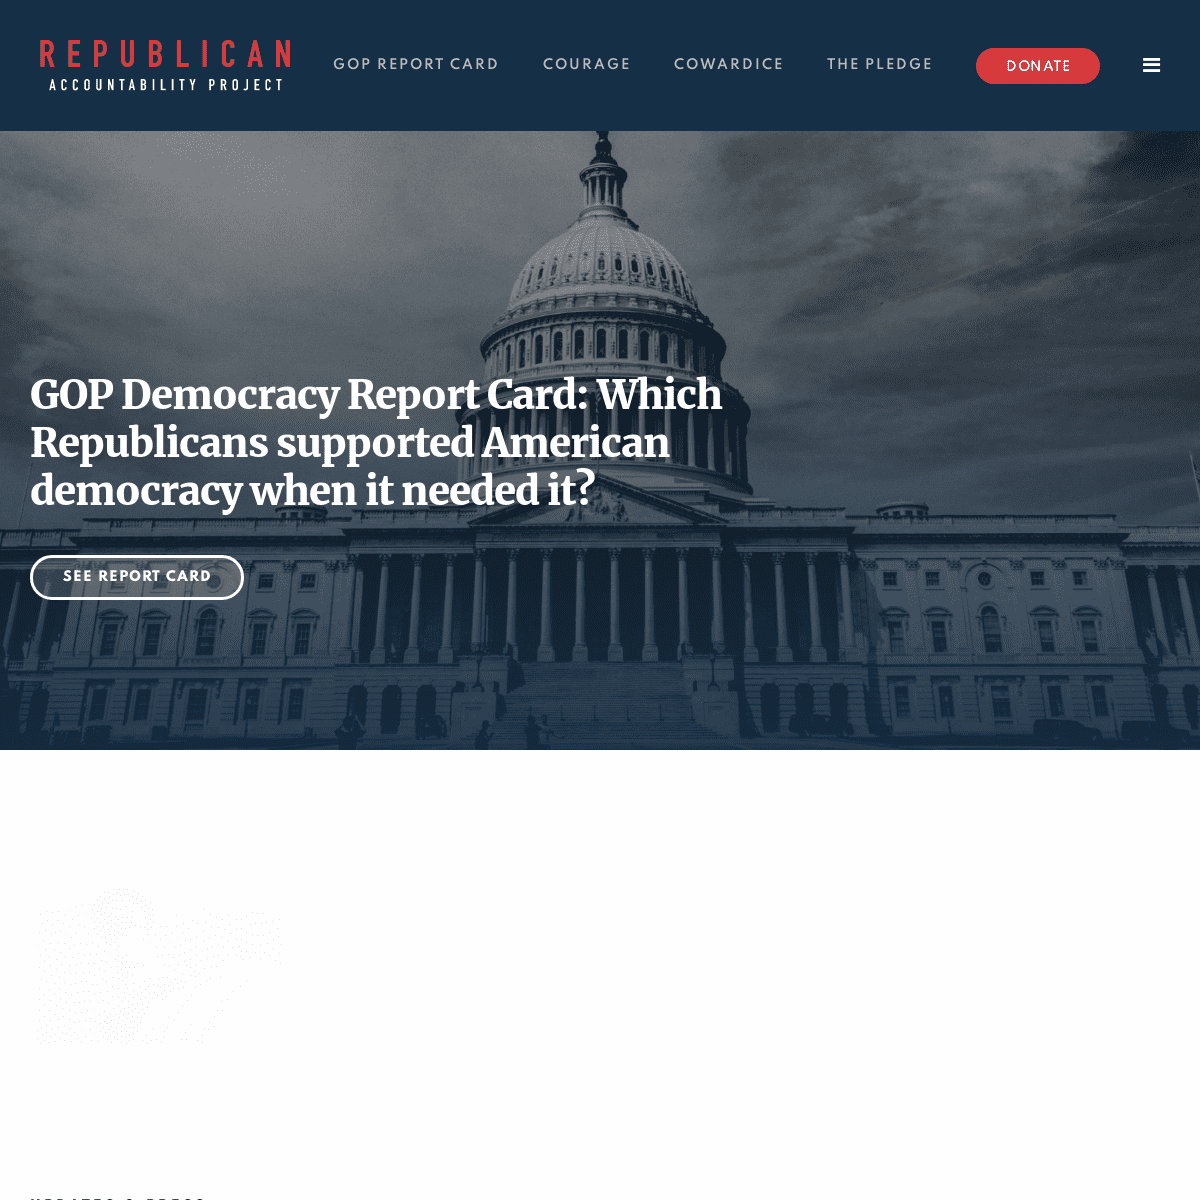 A complete backup of https://accountability.gop